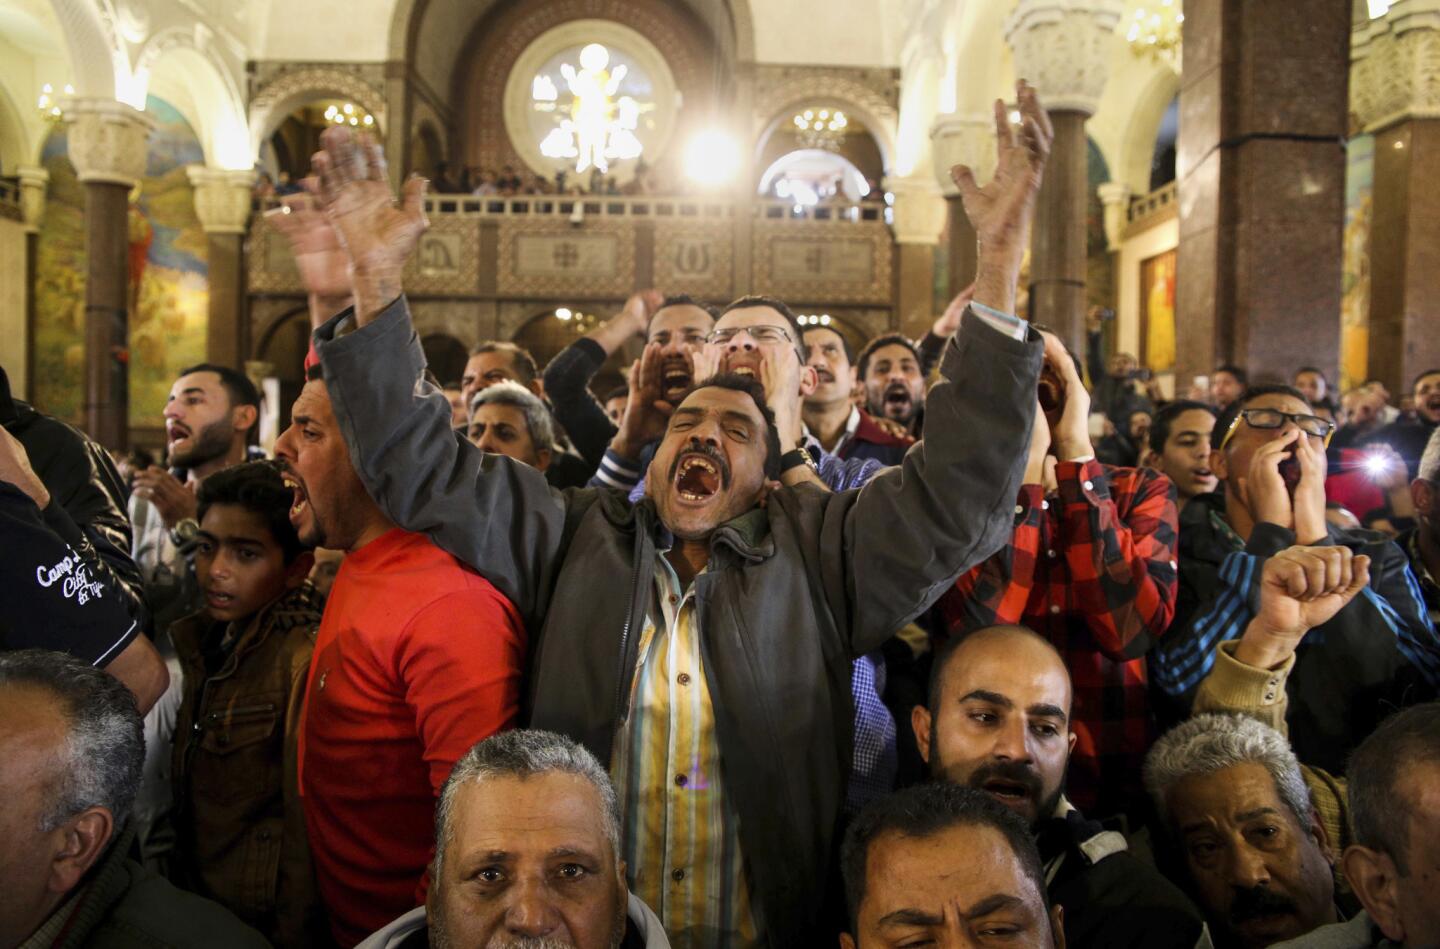 Men react during the funeral for those killed in a Palm Sunday church attack in Alexandria, Egypt. Egyptian Christians buried their dead on Monday, a day after Islamic State suicide bombers killed at least 45 people in coordinated attacks targeting Palm Sunday services in two cities.